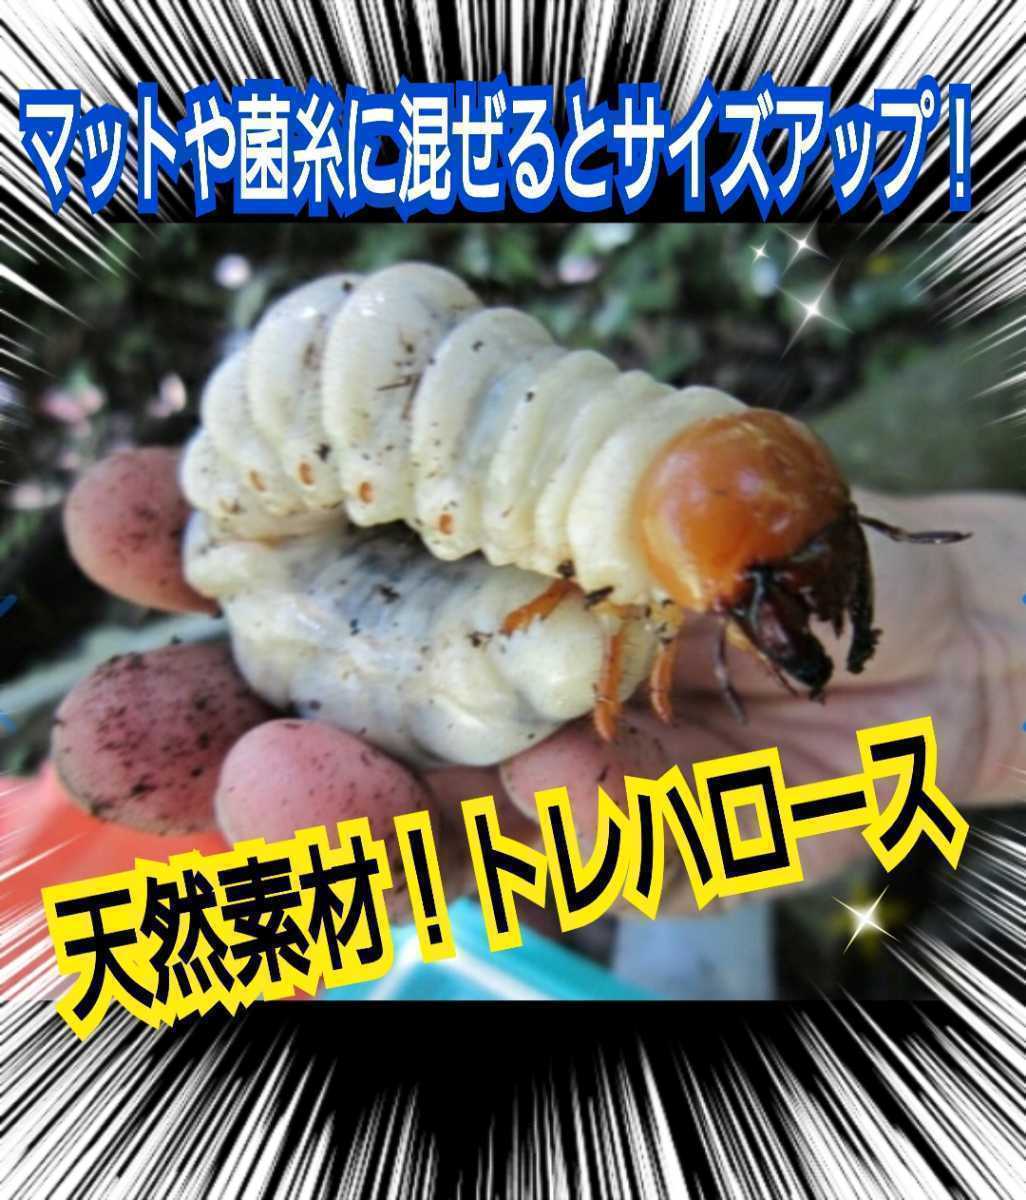  stag beetle * rhinoceros beetle. energy source is kore!tore Hello s powder [2 sack ] mat .. thread, jelly .... only! size up, production egg .., length ..